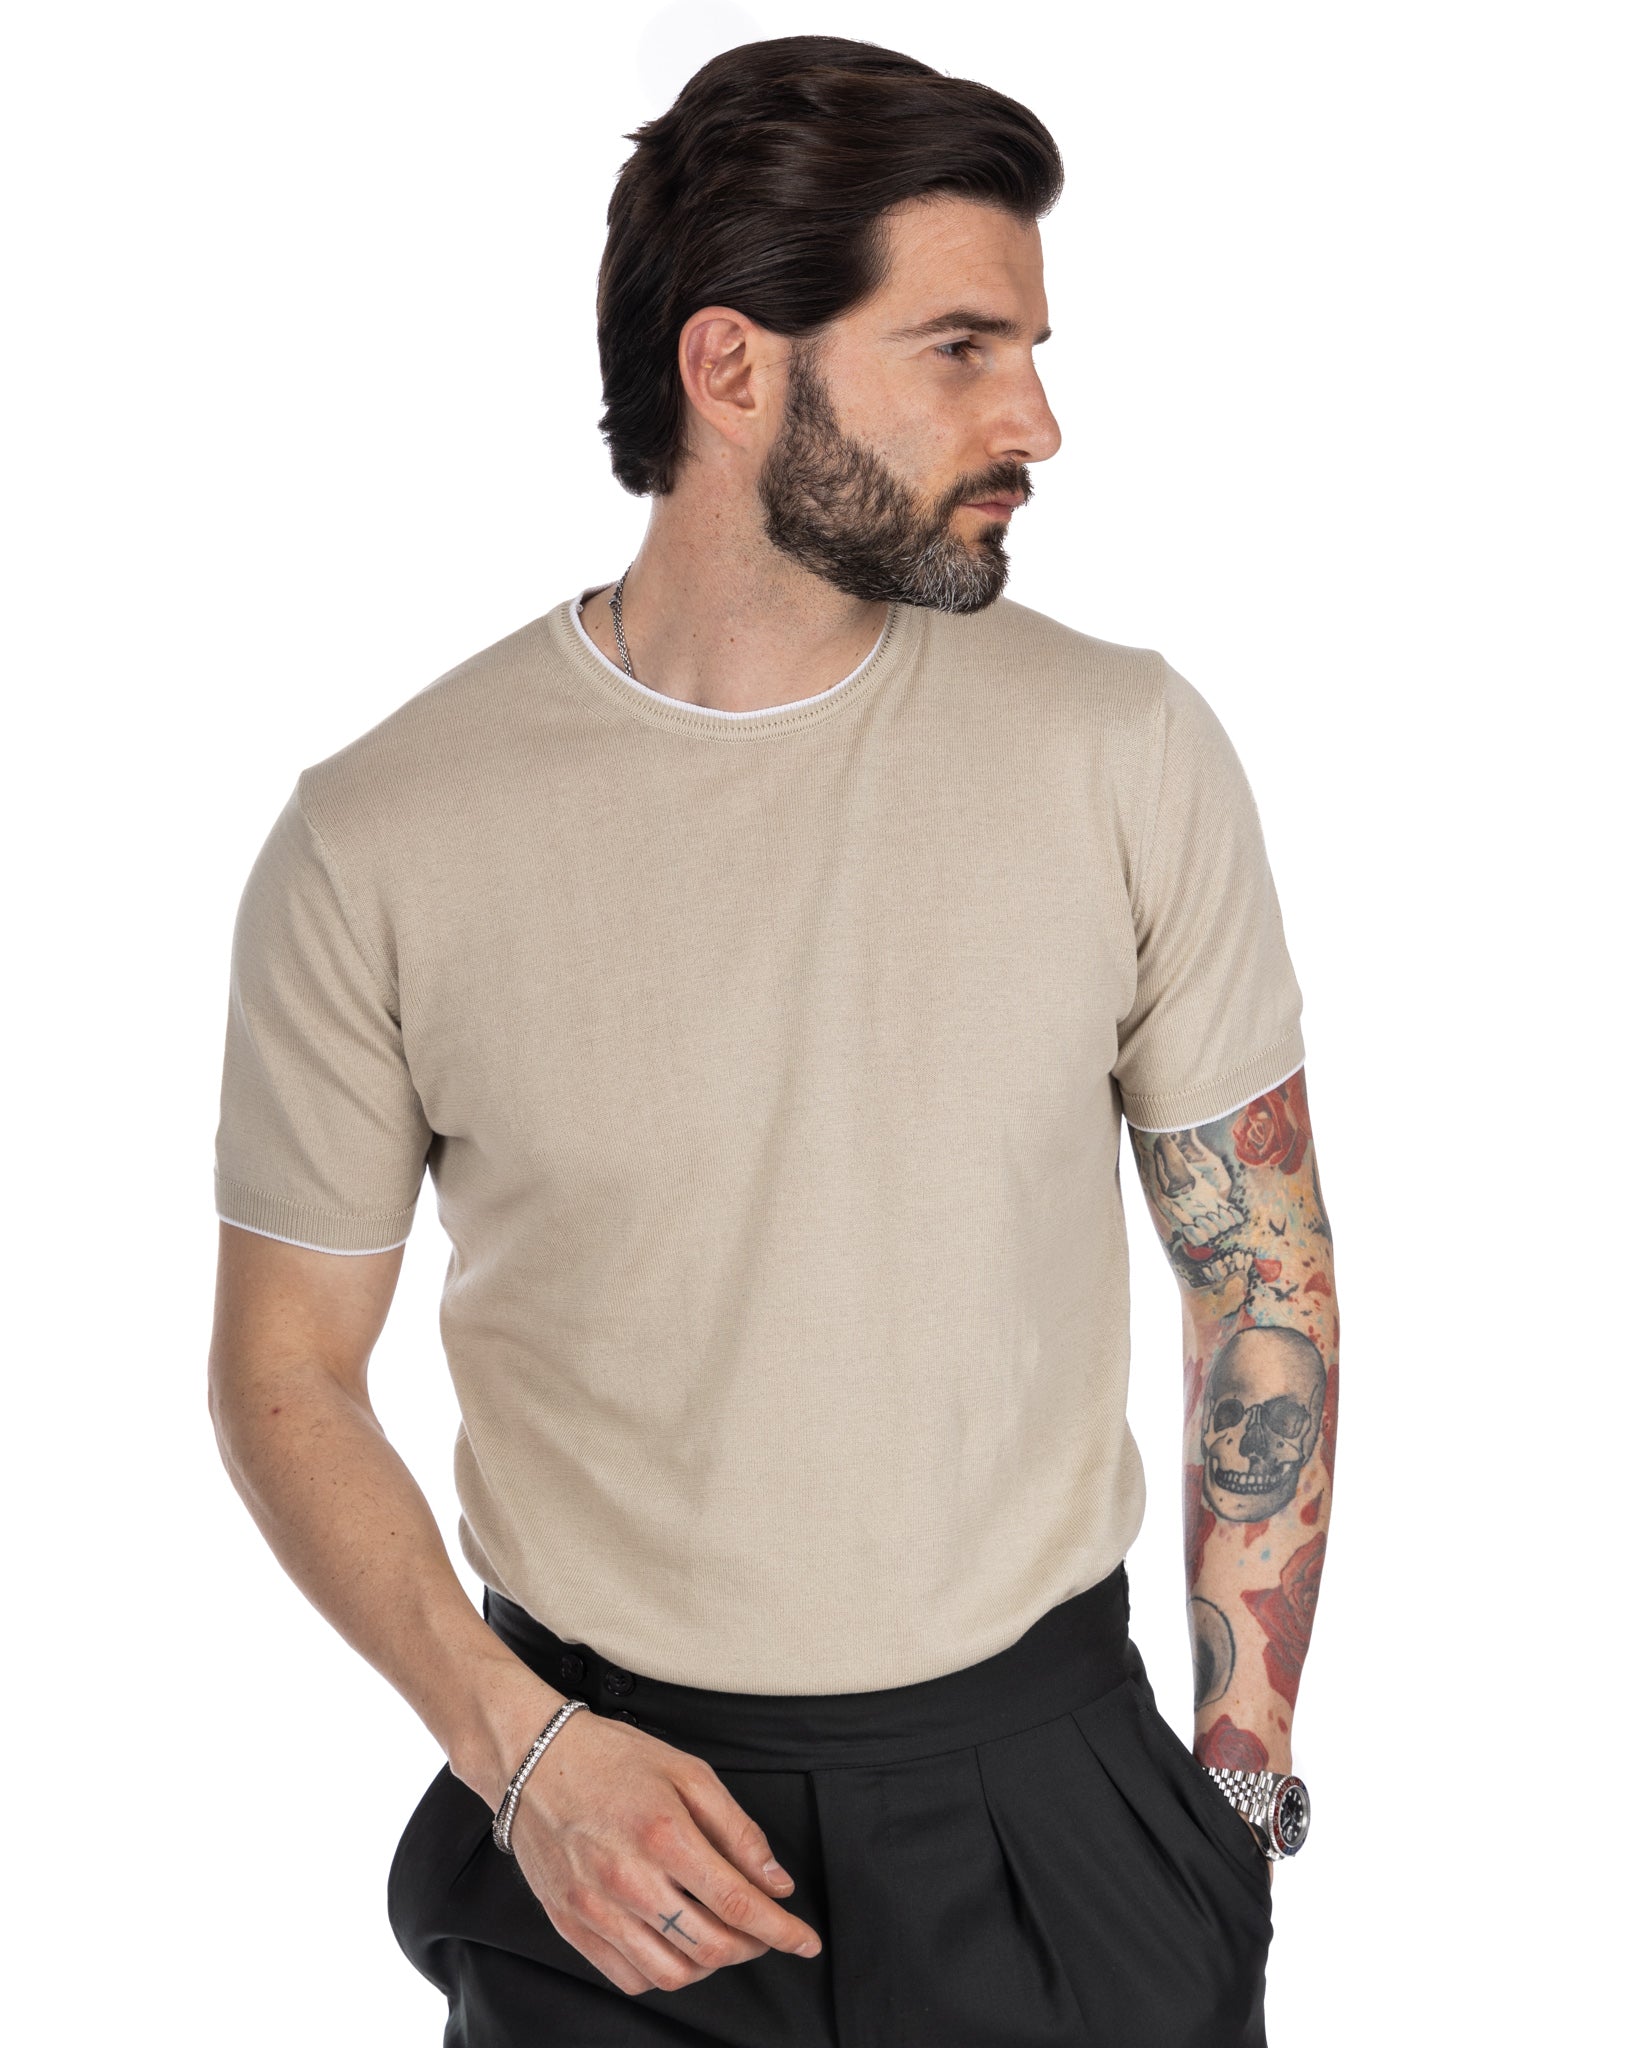 Holger - beige knitted t-shirt with contrast